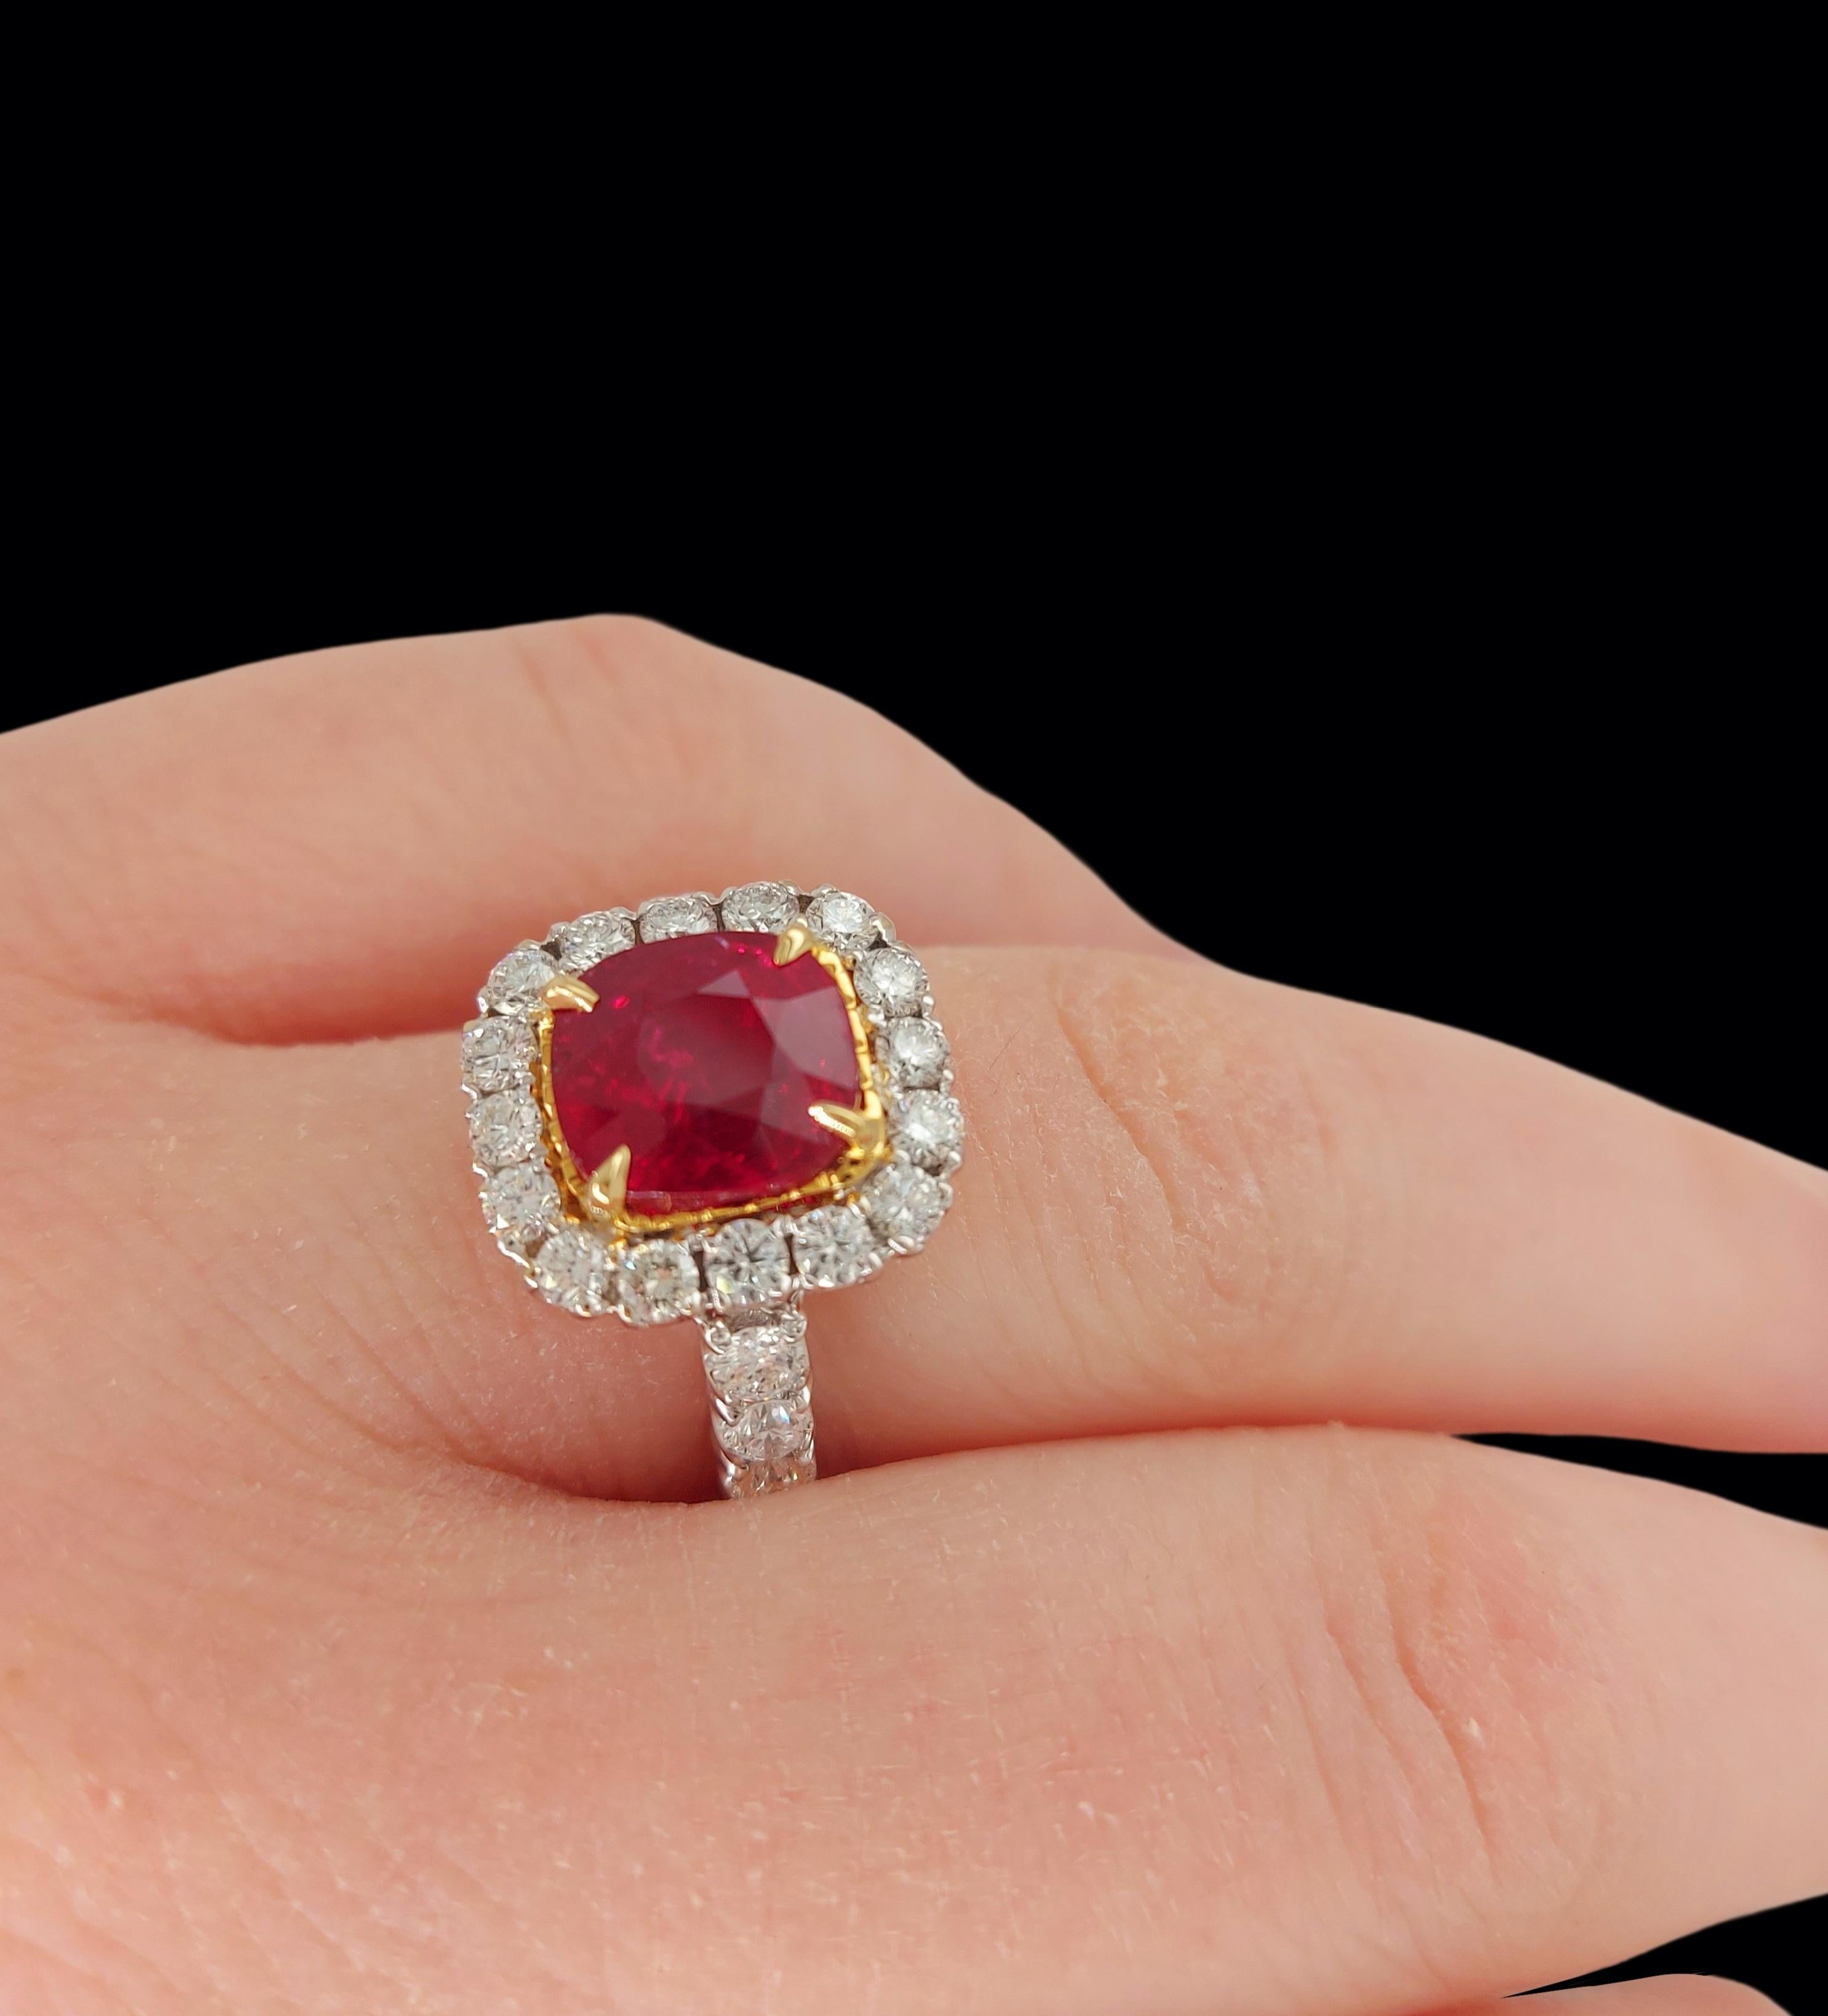 18kt White Gold 4 Ct No Heat Vivid Ruby Ring, 1.5 Ct Diamonds, CGL Certificate For Sale 8